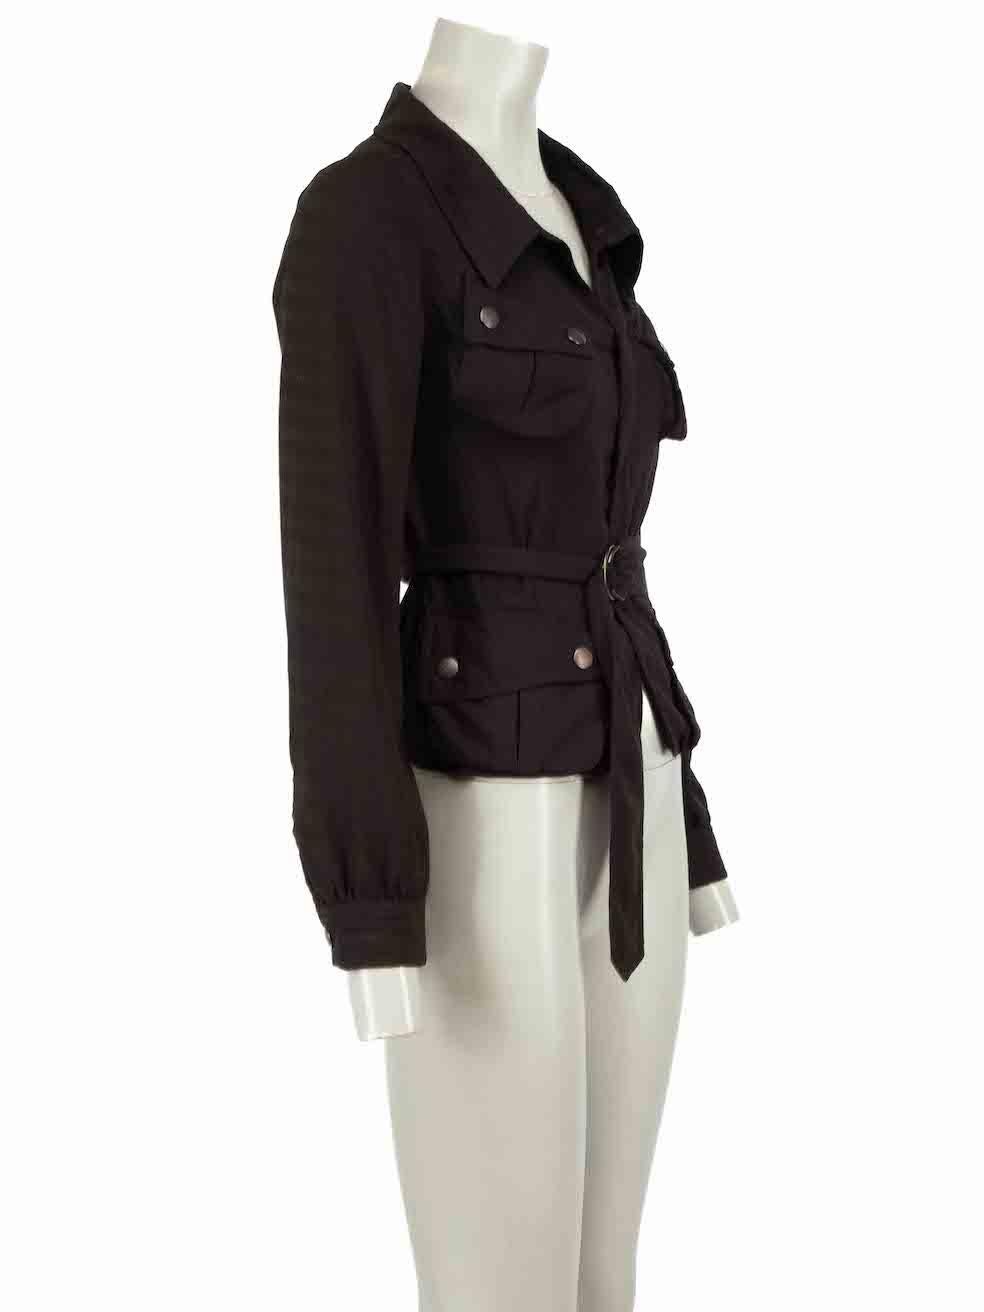 CONDITION is Very good. Minimal wear to blazer is evident. Minimal wear pilling to polyester on this used Jean Peal Gaultier designer resale item.

Details
Black
Synthetic
Utility jacket
Short length
Belted
Front zip closure
4x Front pockets with